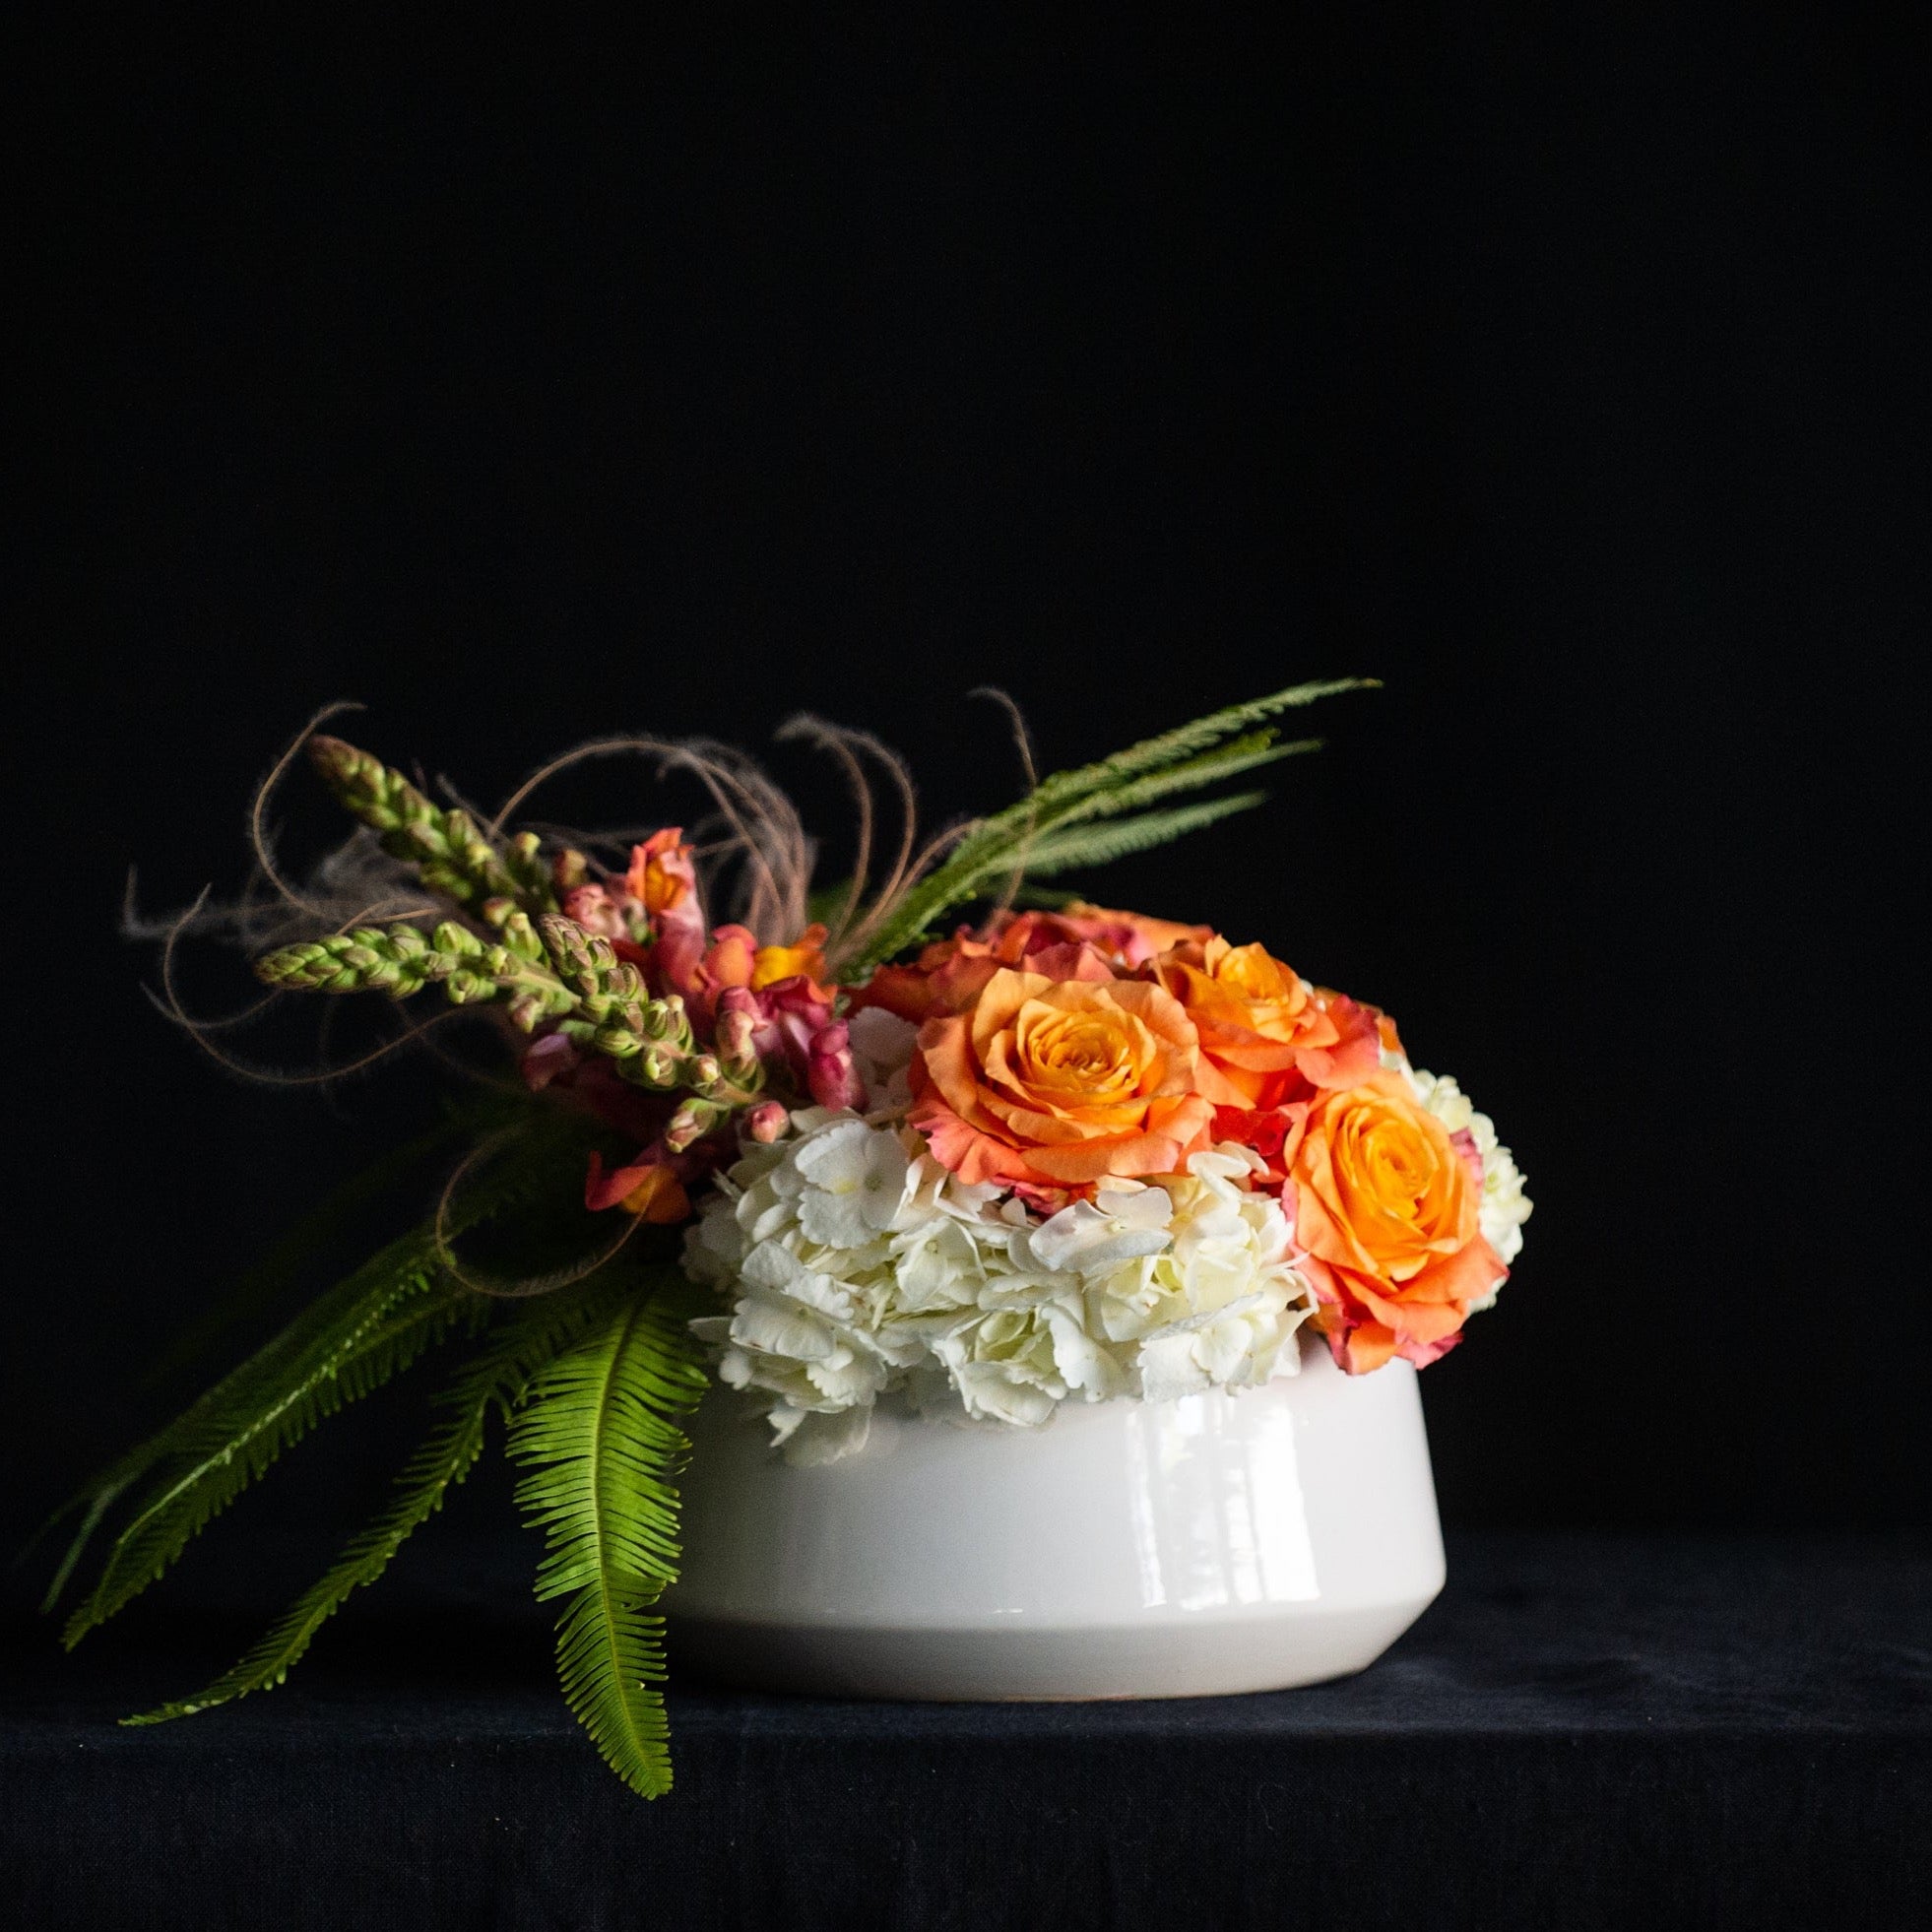 Filled with white hydrangea, orange roses, and salmon snapdragons it's all about peachy perfection in a white ceramic bowl